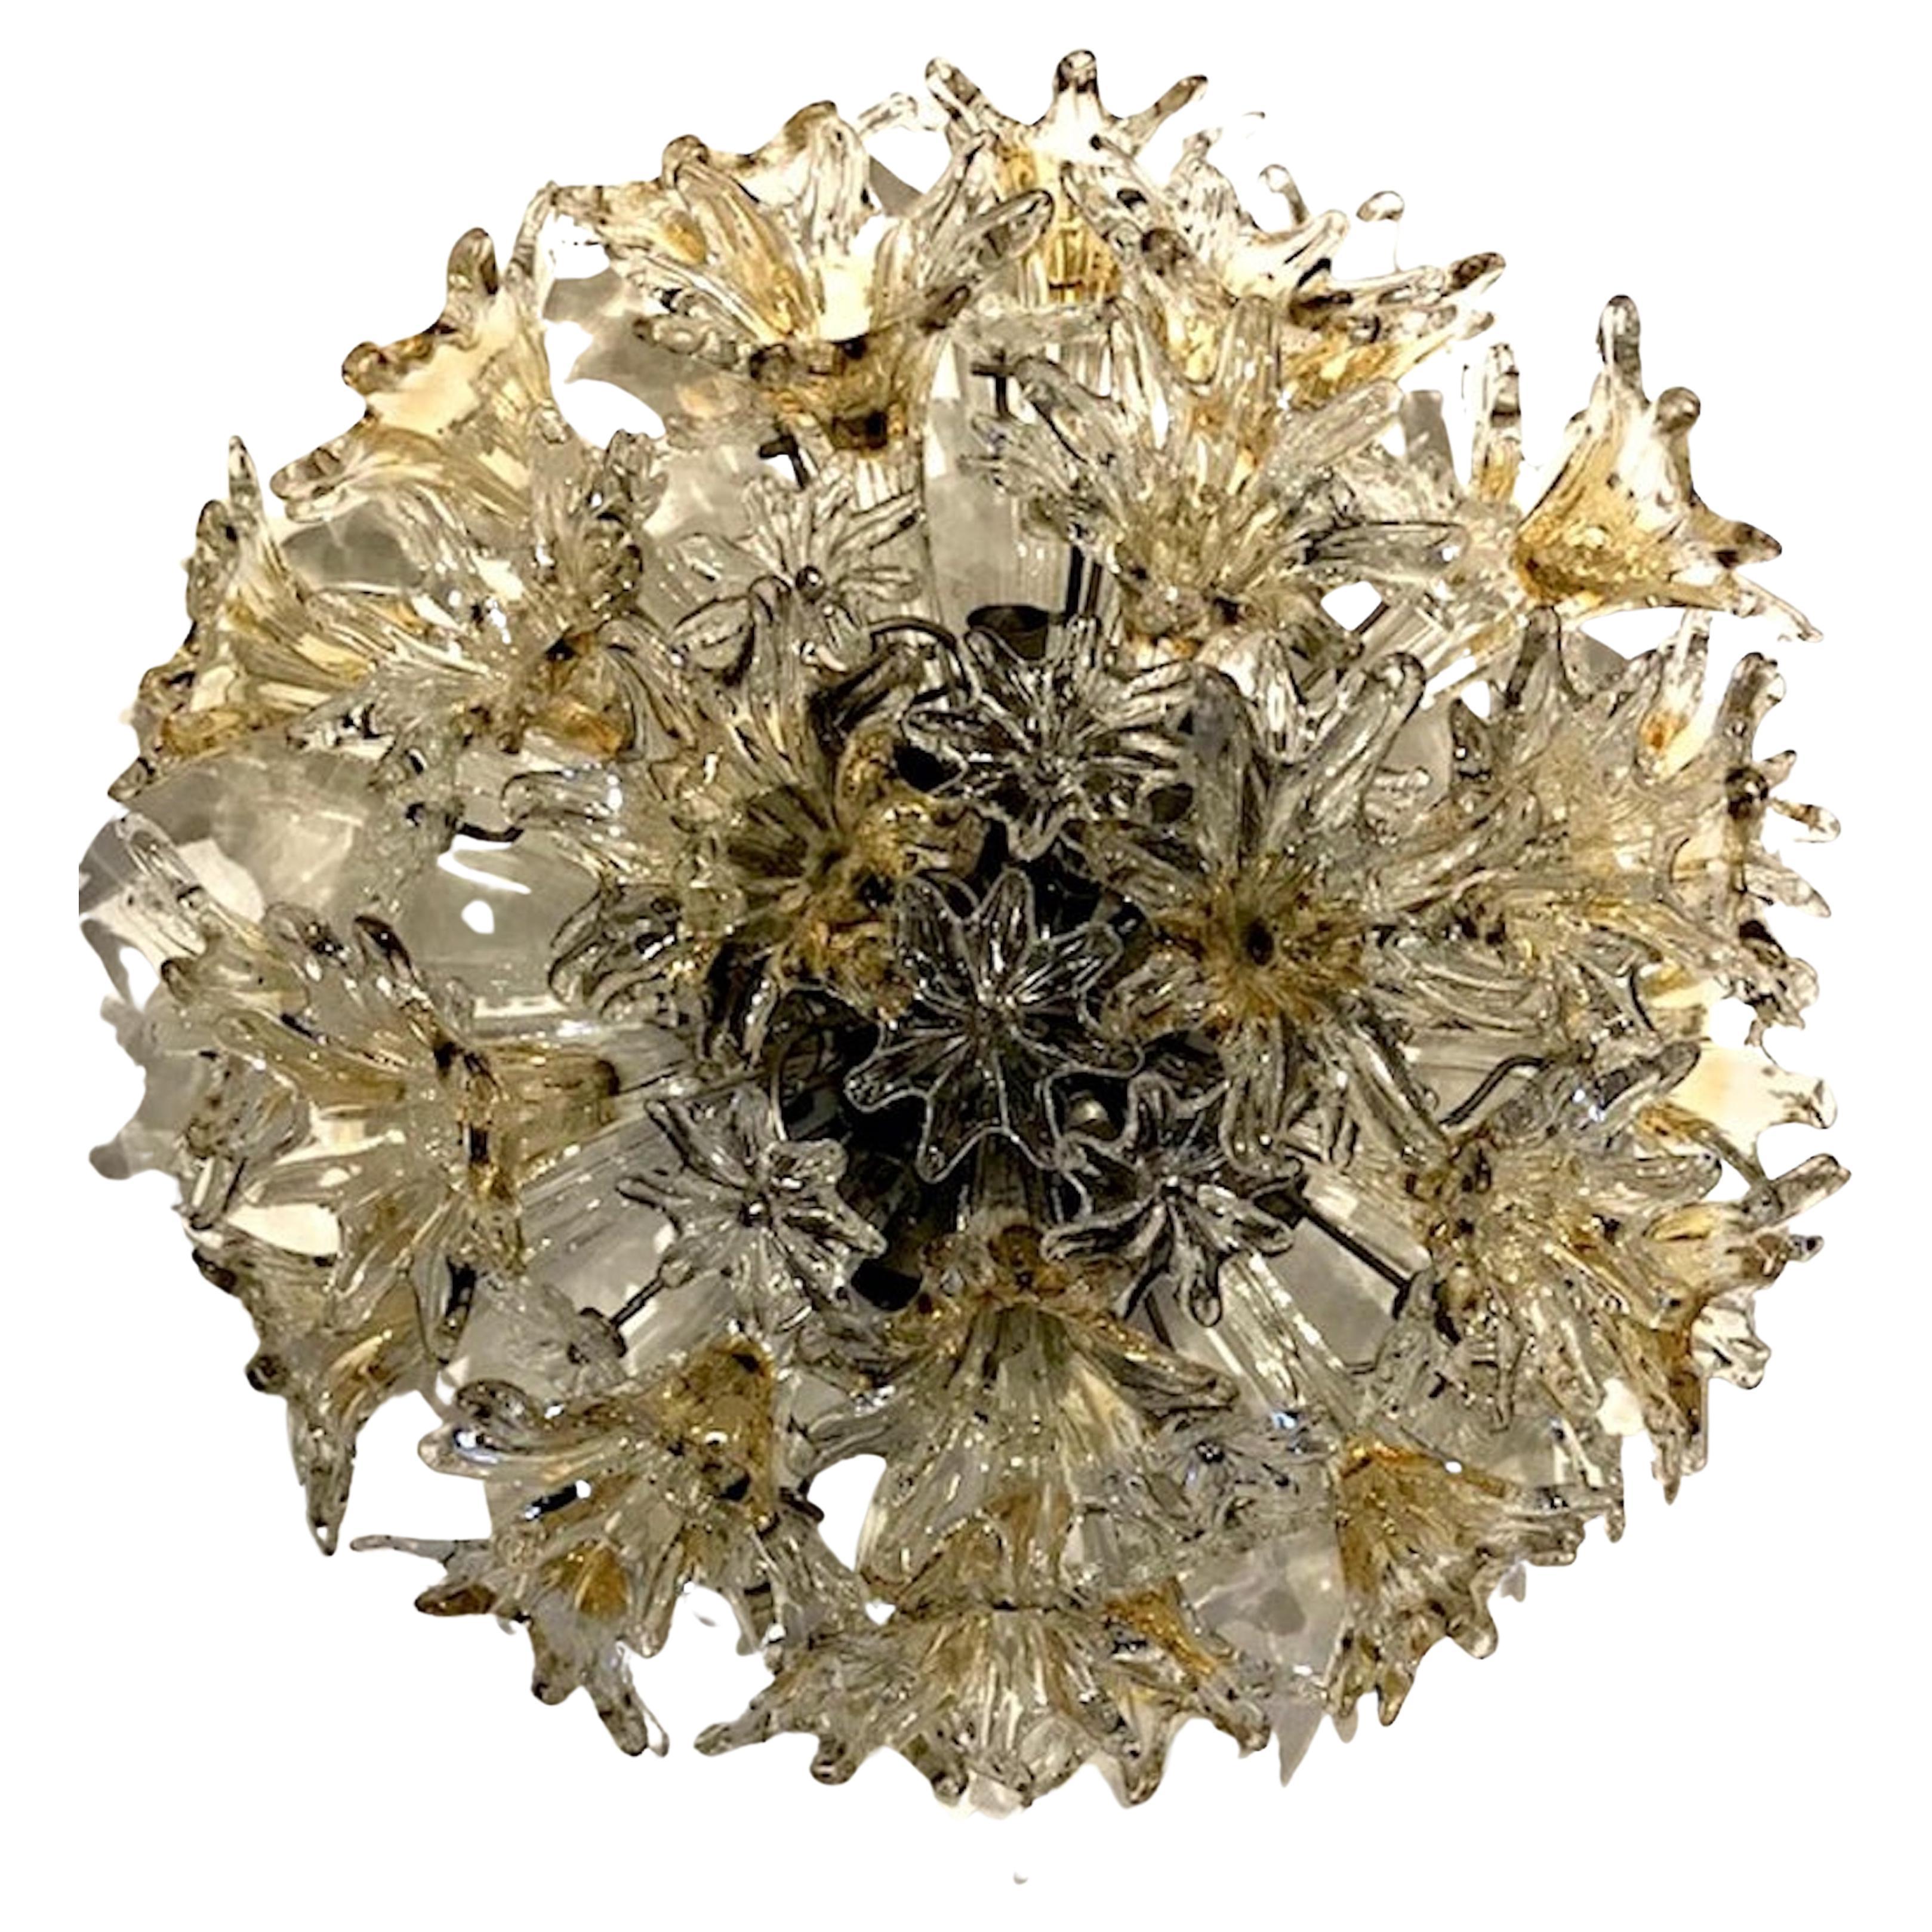 Pair of designed by Toni Zuccheri for Venini is this Esprit ceiling mount light. Venini describes the model “Esprit” as an explosion of flowers and stars in hand blown, handcrafted glass. Designed to illuminate, shine, sparkle and excite, “Esprit”